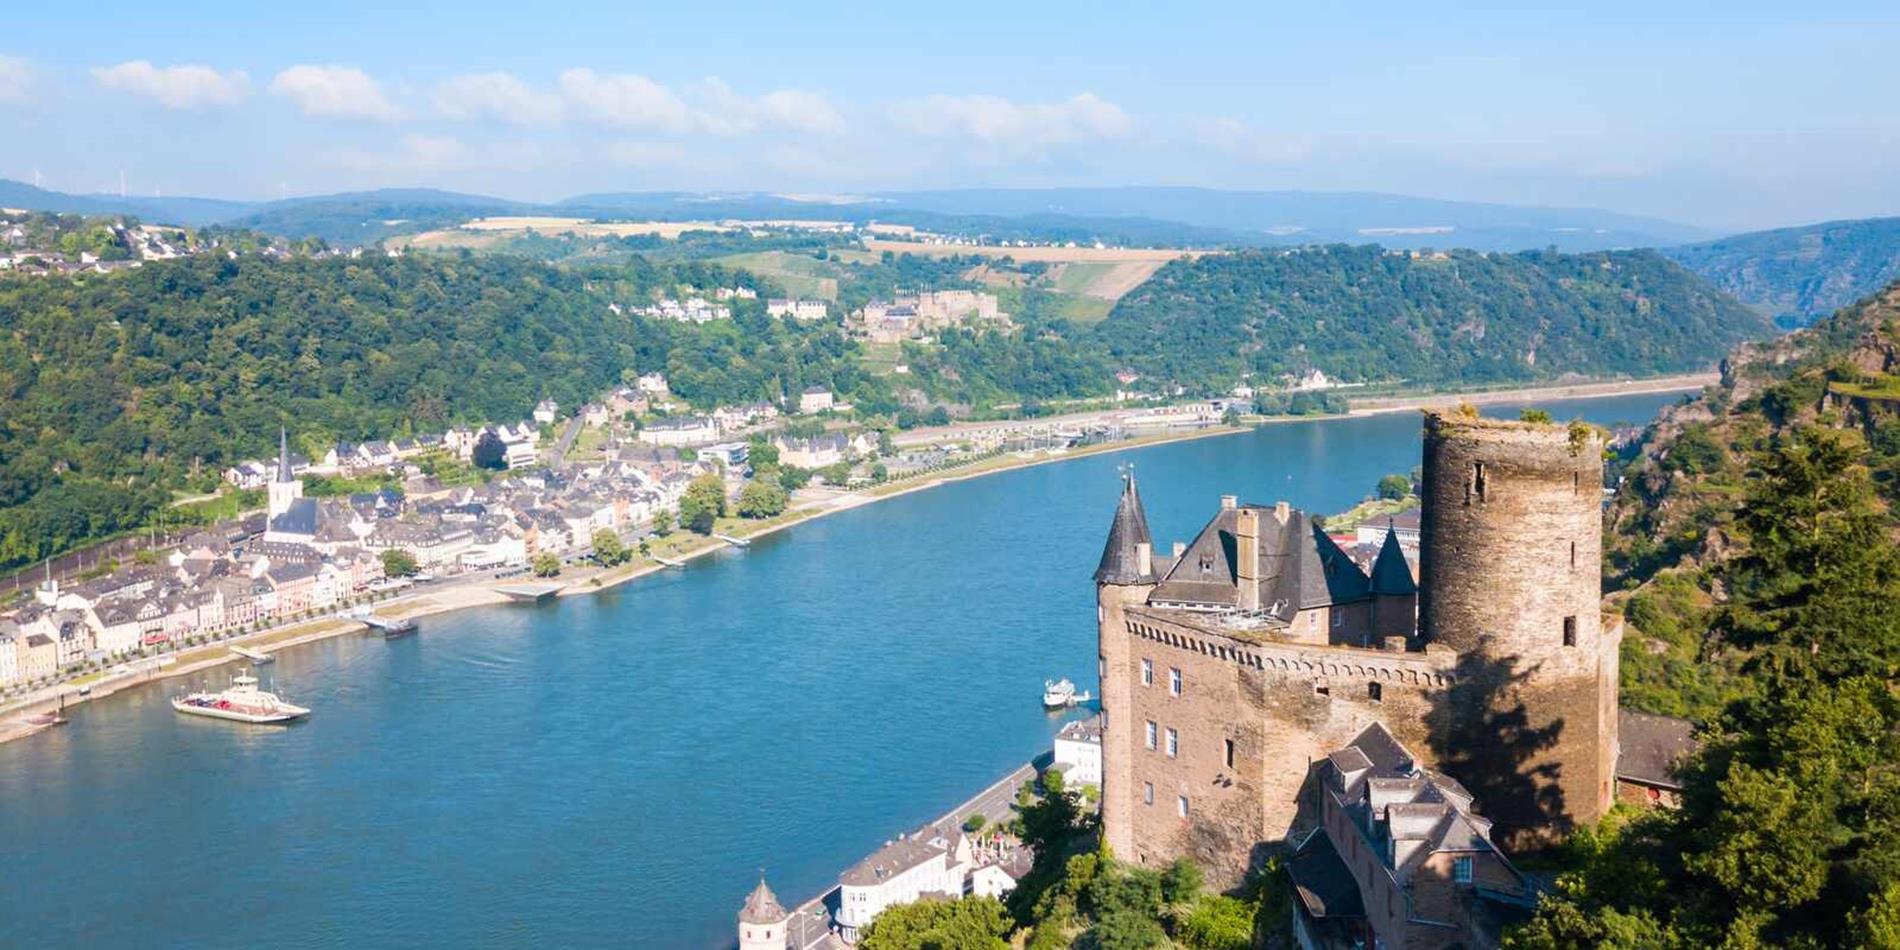 Katz Castle stands tall long the banks of the Rhine River